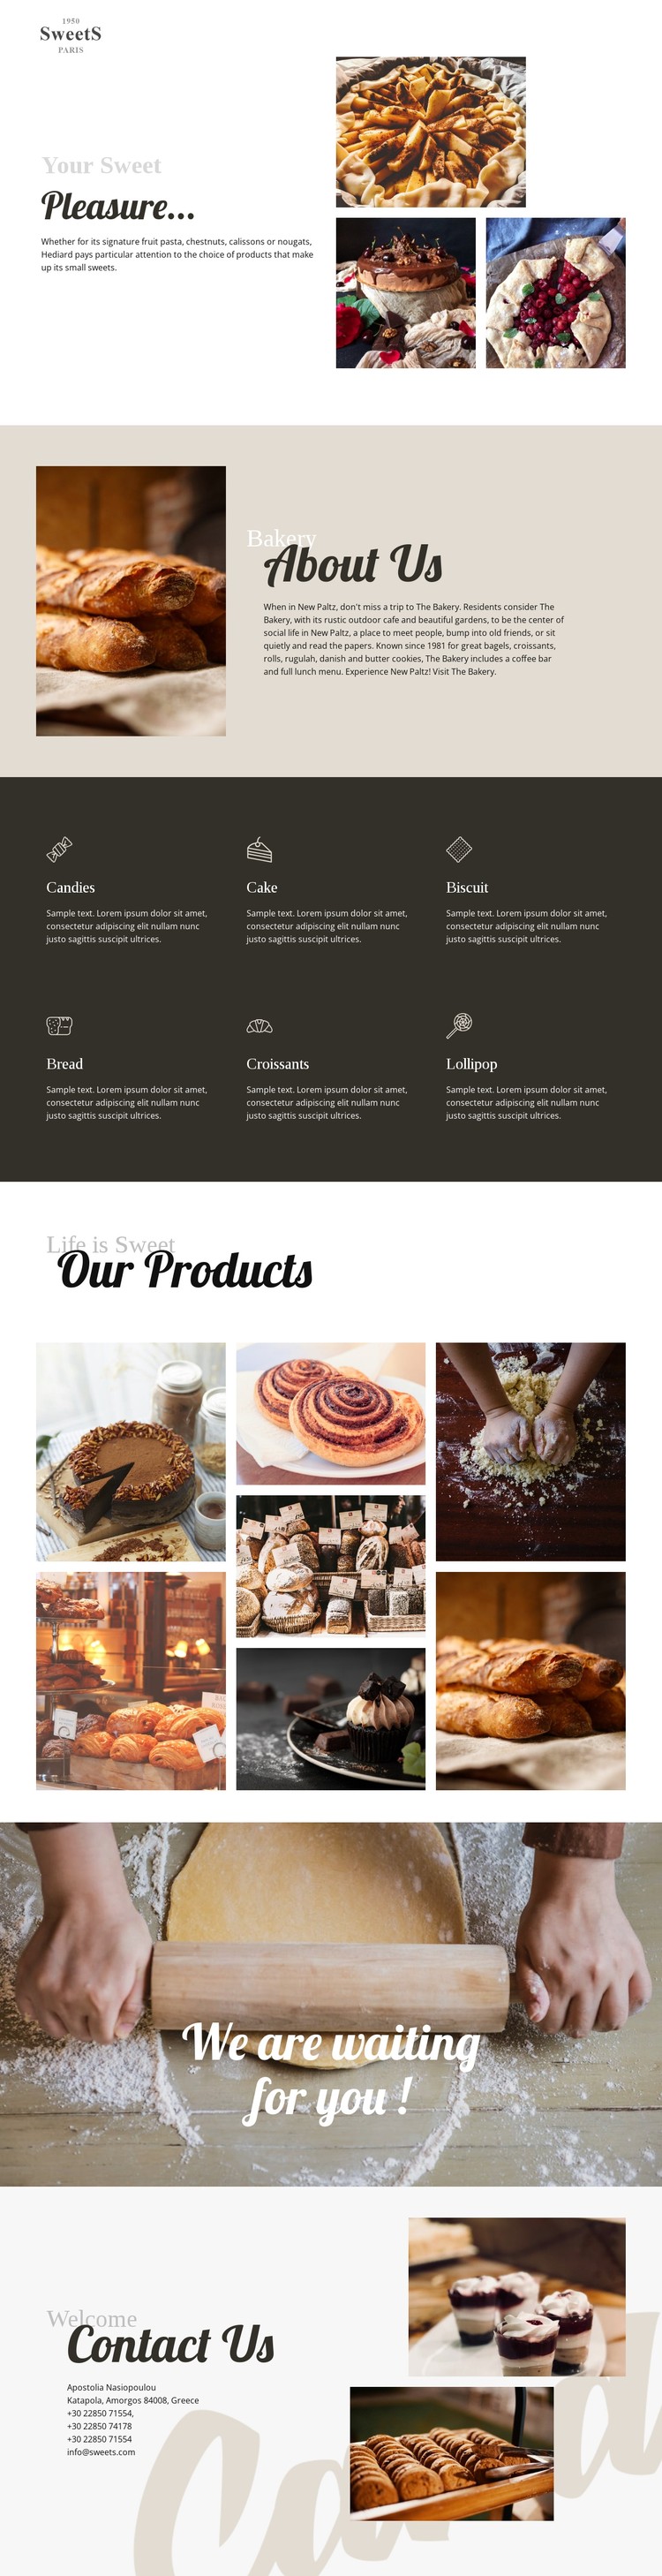 Cakes and baking food CSS Template